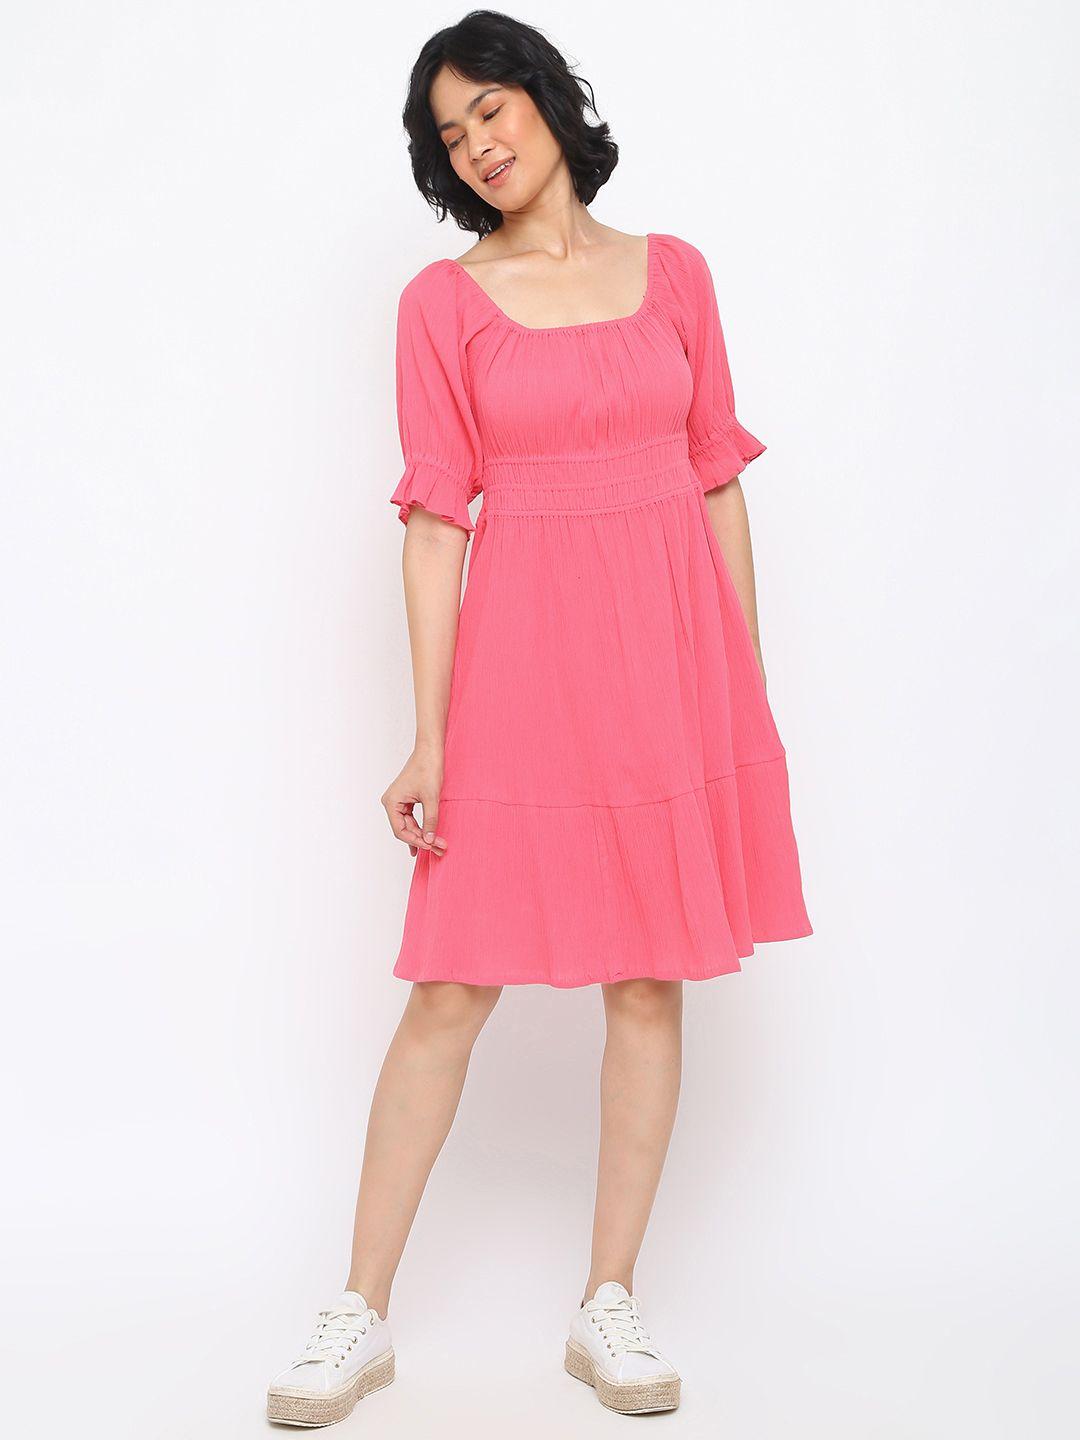 fabindia-pink-crinkled-square-neck-empire-dress-with-belt